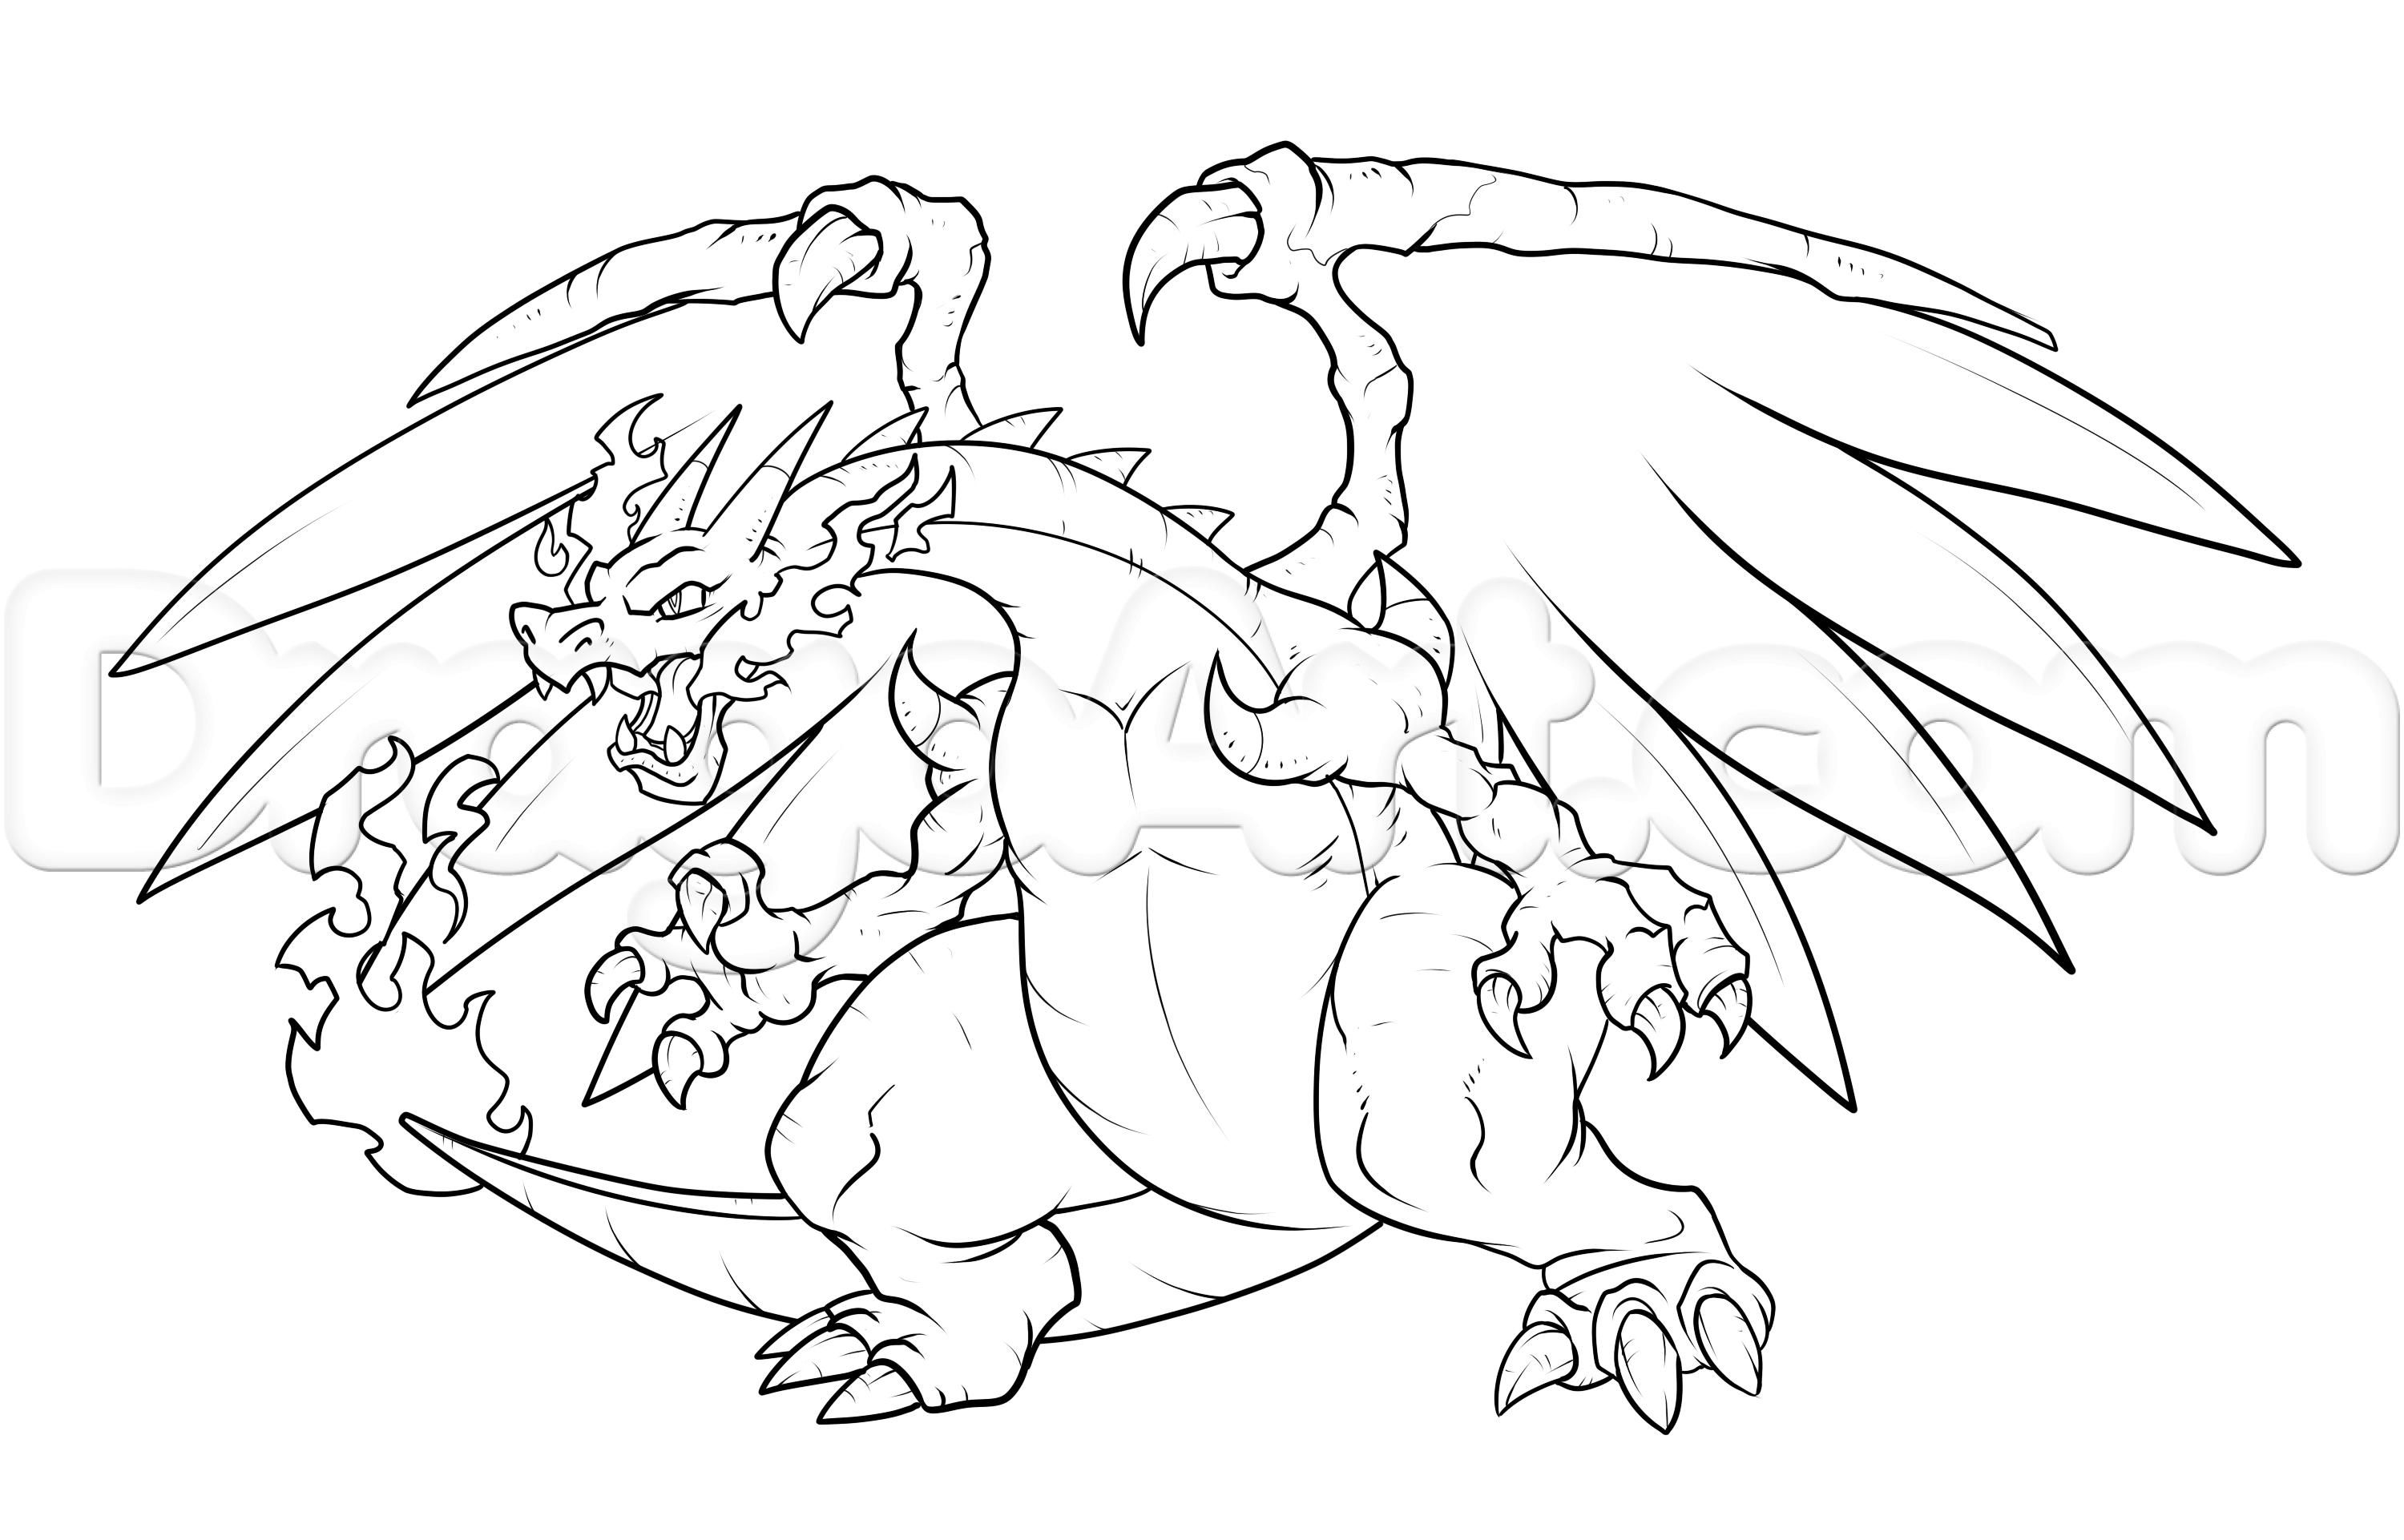 Pokemon Coloring Pages Mega Charizard Ex - Coloring Page